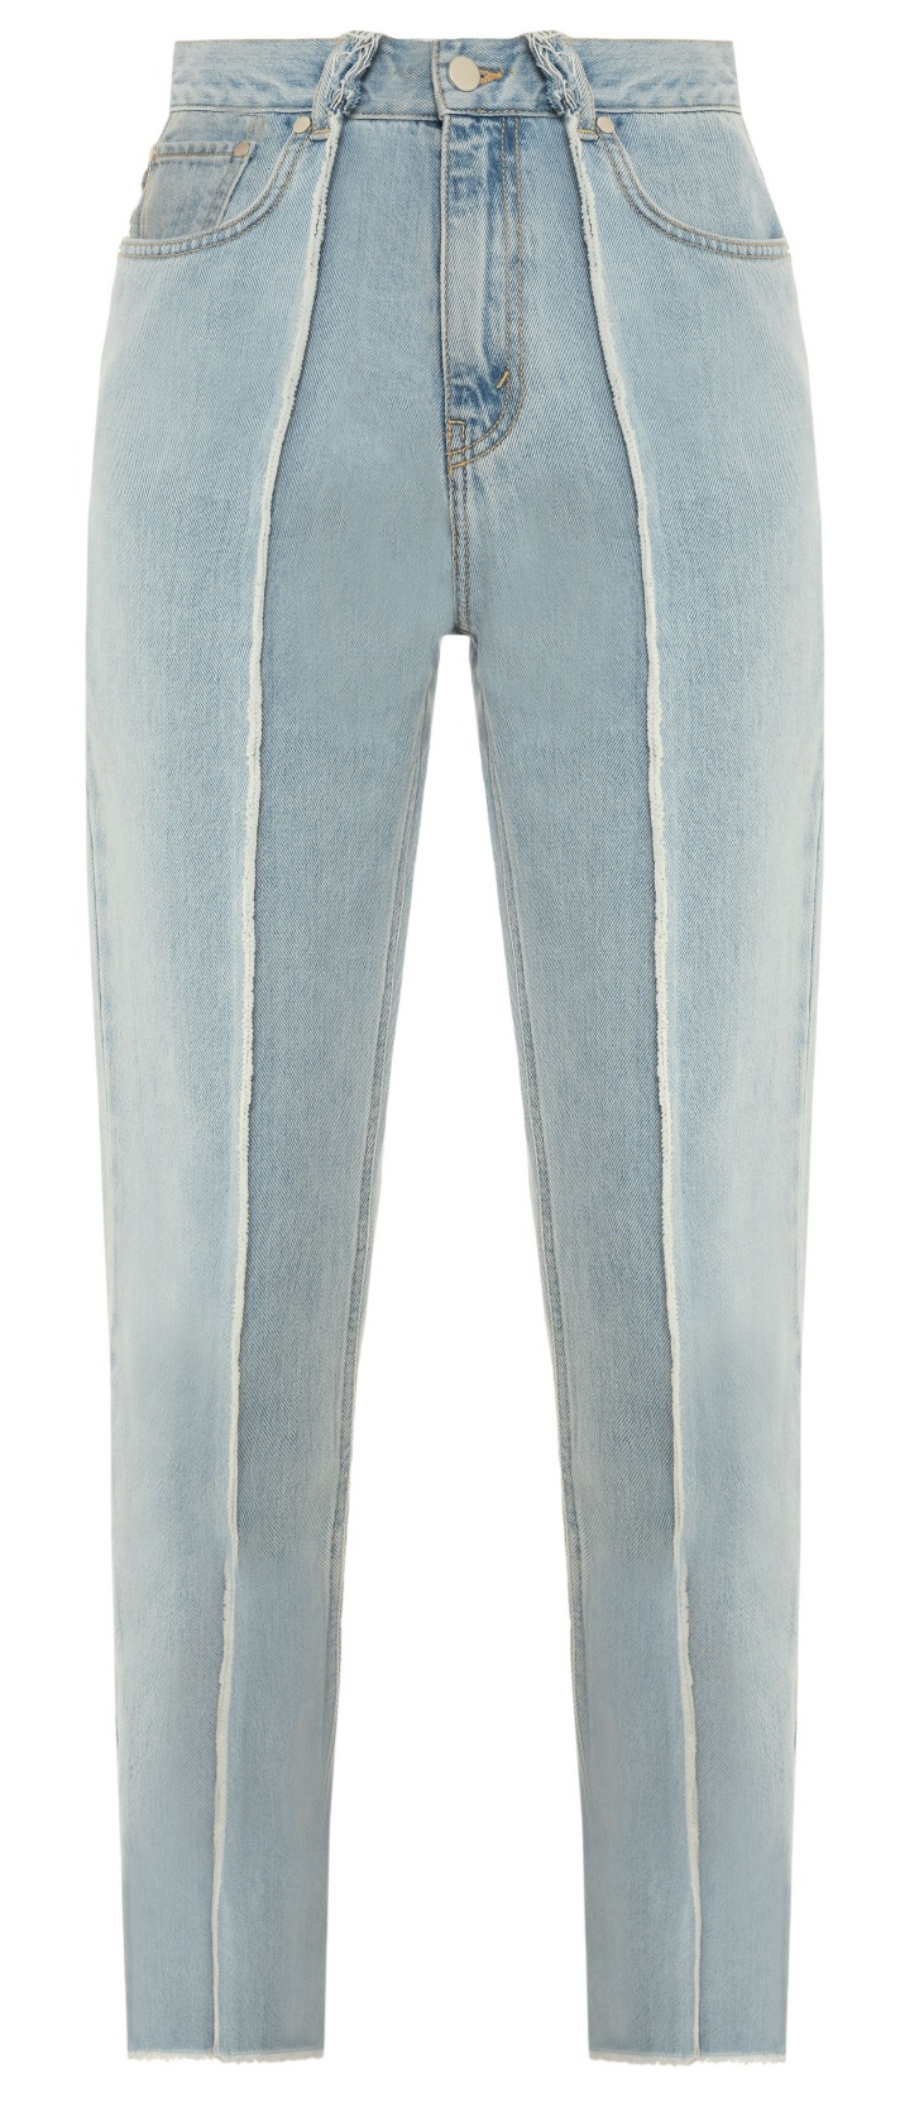 MORE is LOVE | Rokh - Blue Jeans - Jeans